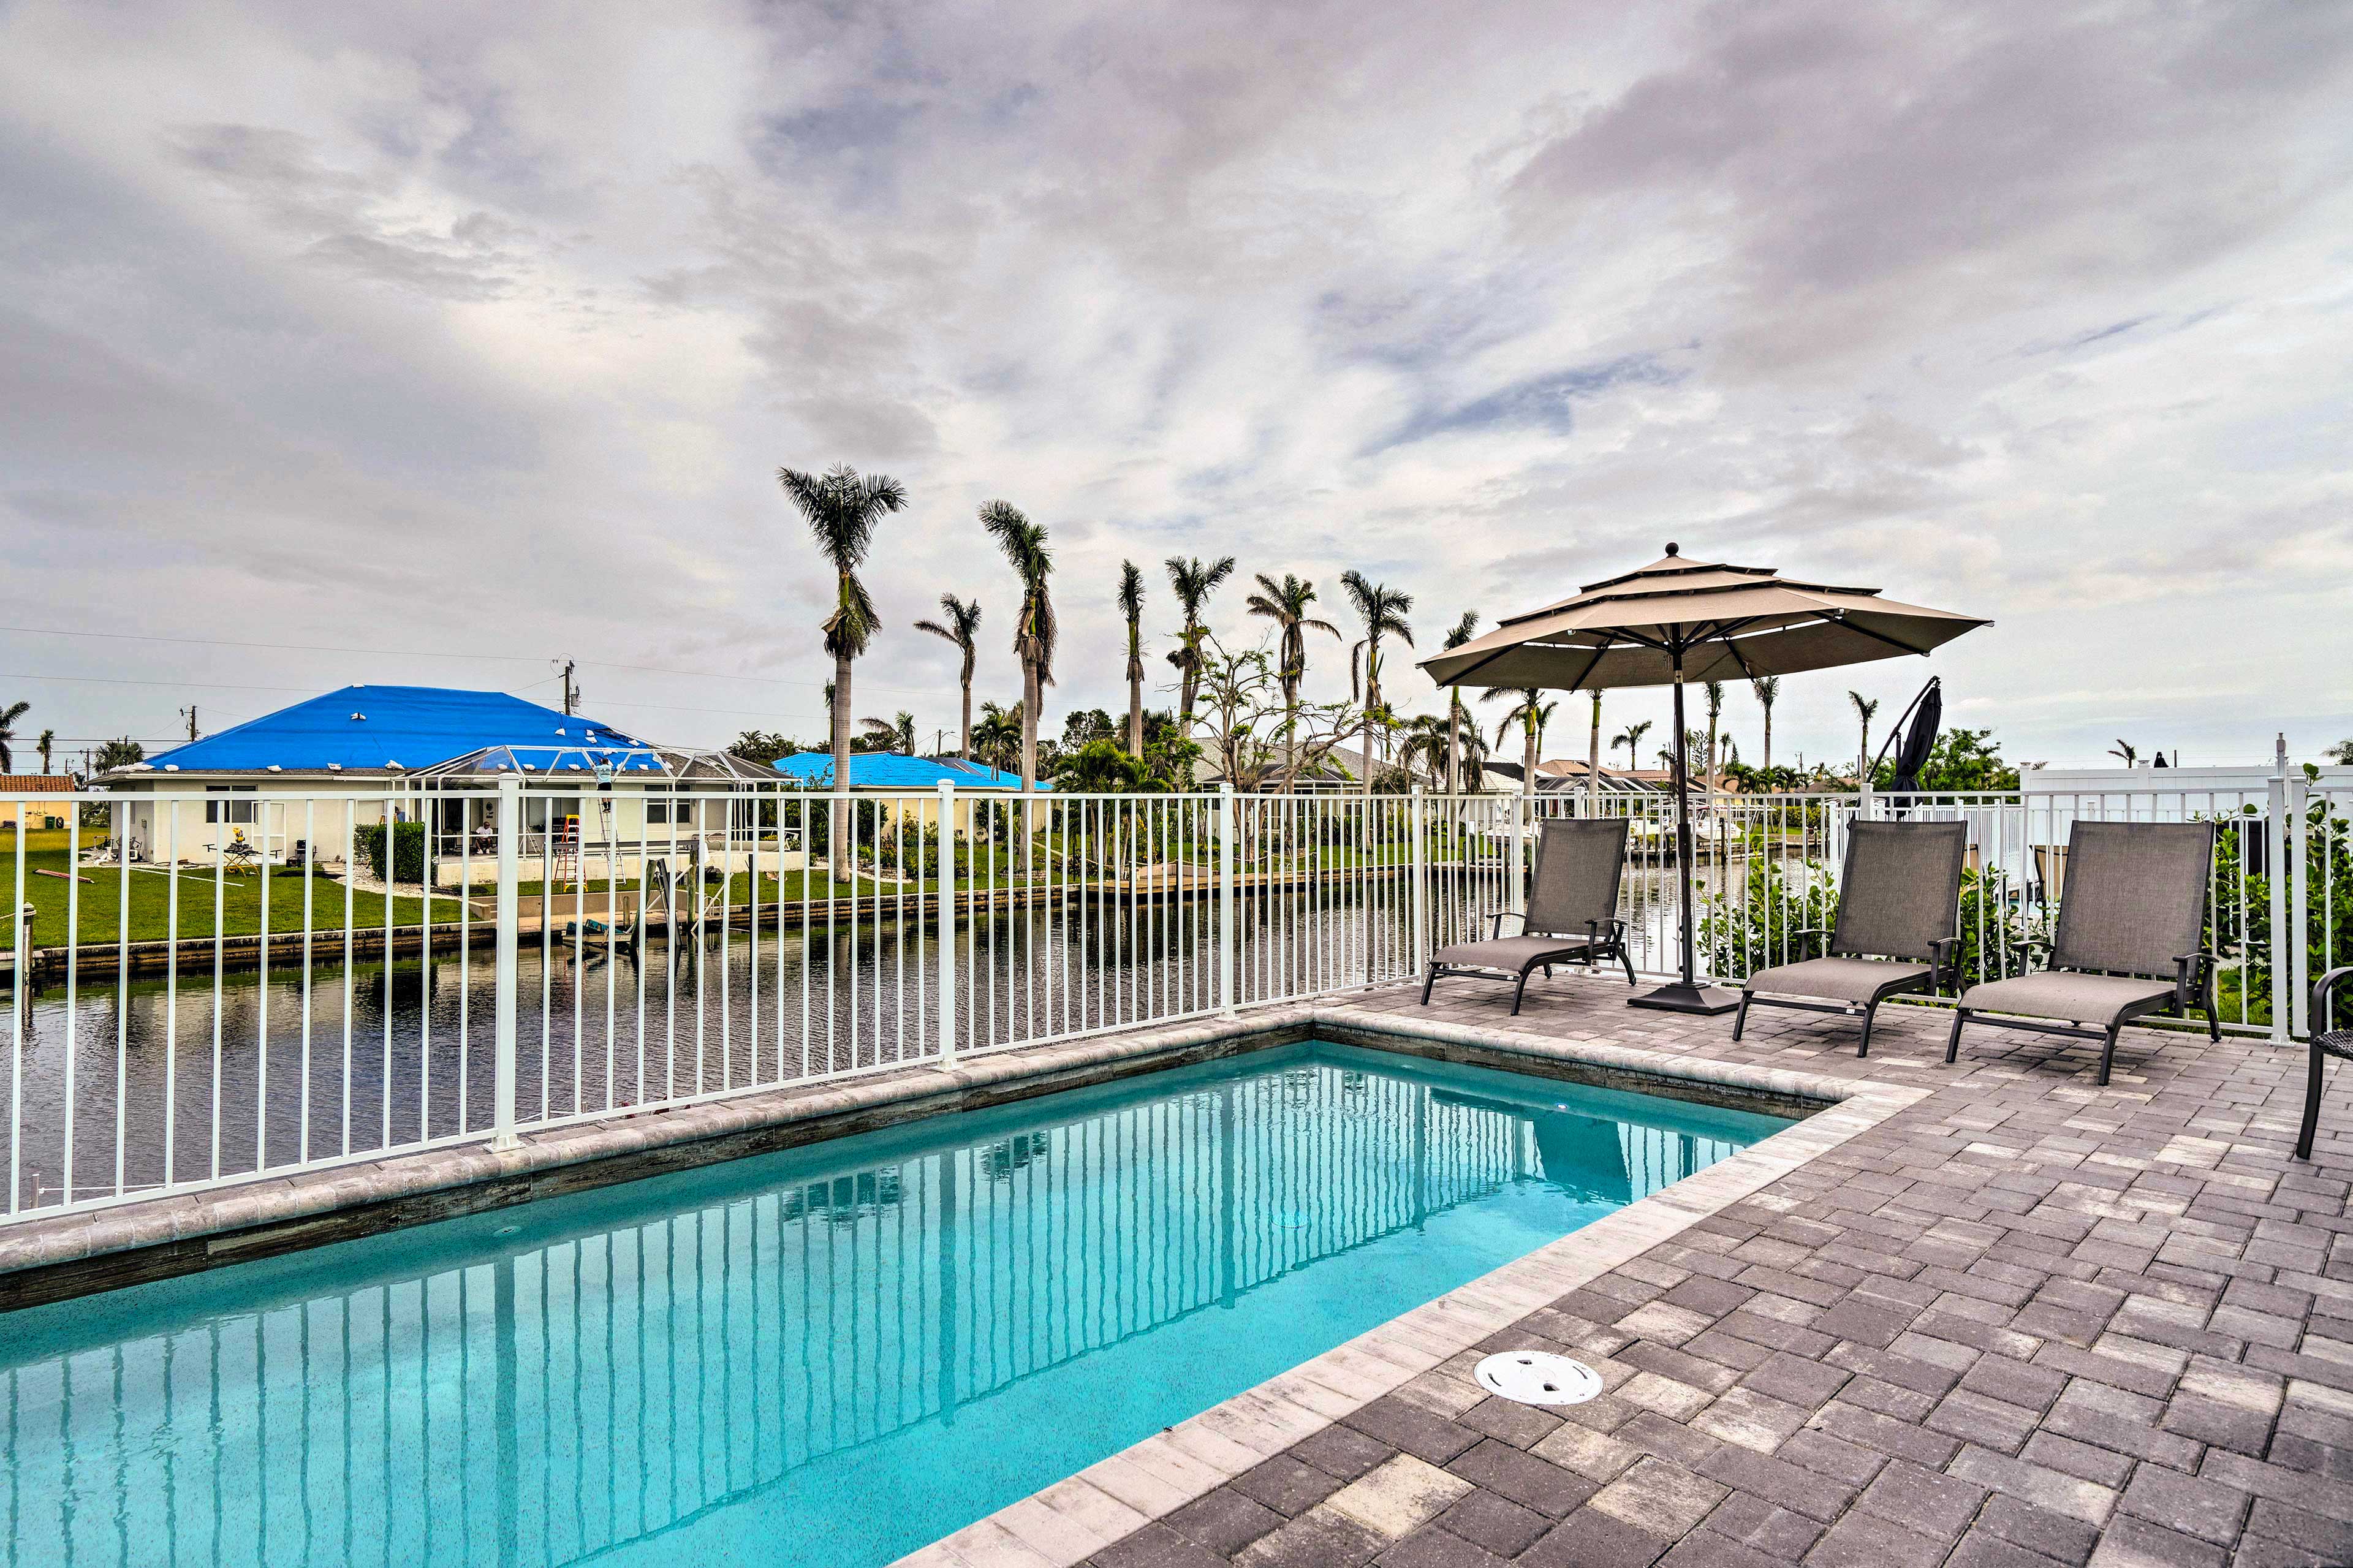 Property Image 1 - NEW! Waterfront Cape Coral Retreat w/ Heated Pool!